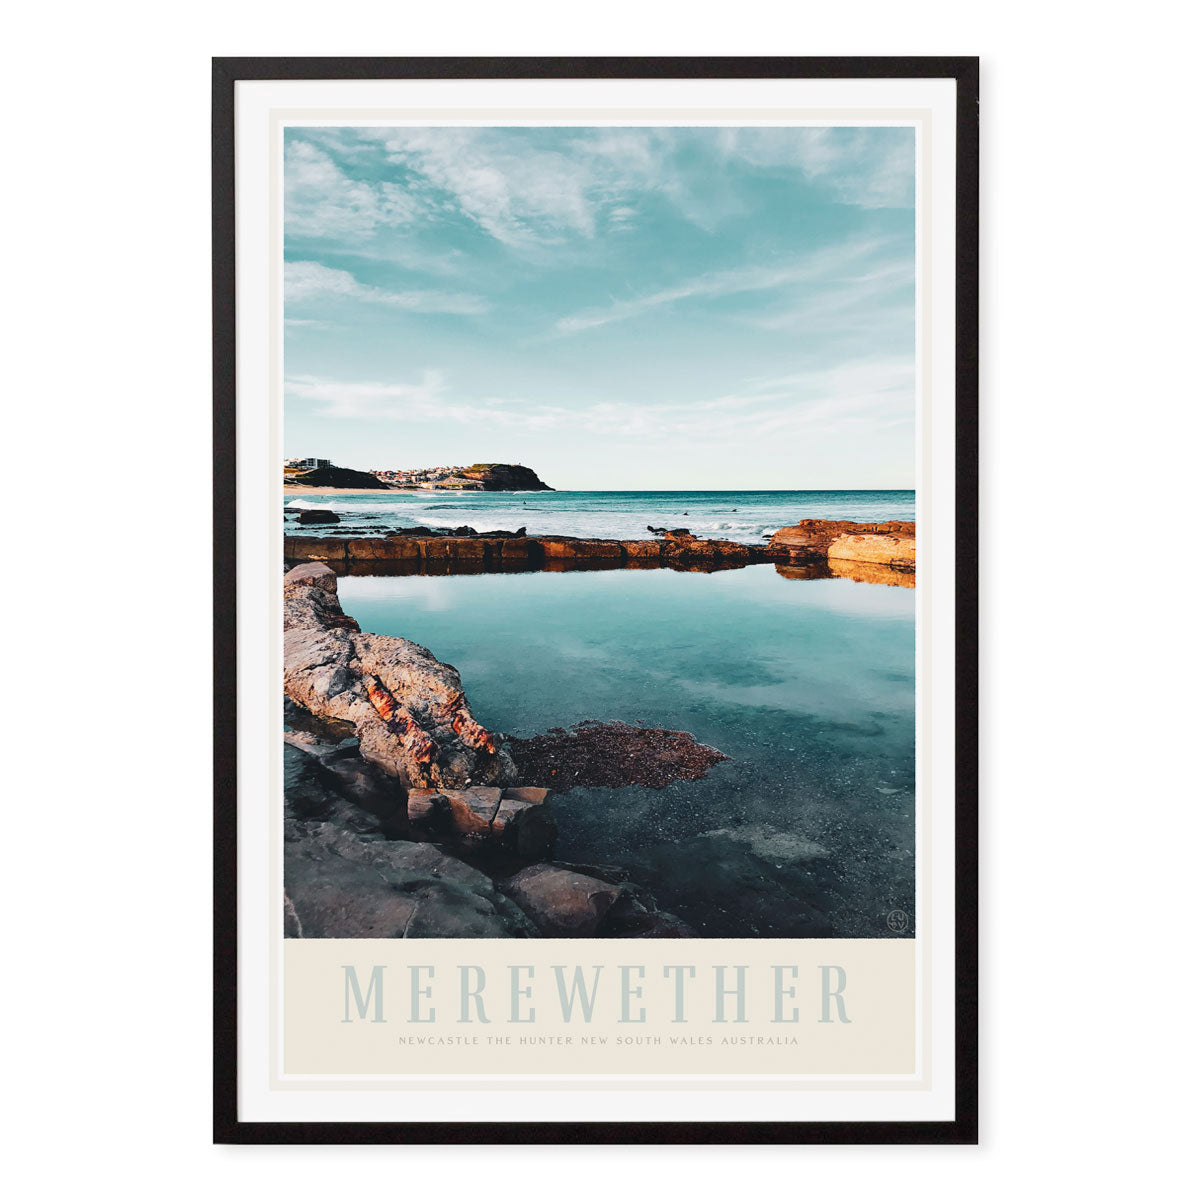 Merewether Beach vintage retro travel poster print in black frame from Places We Luv